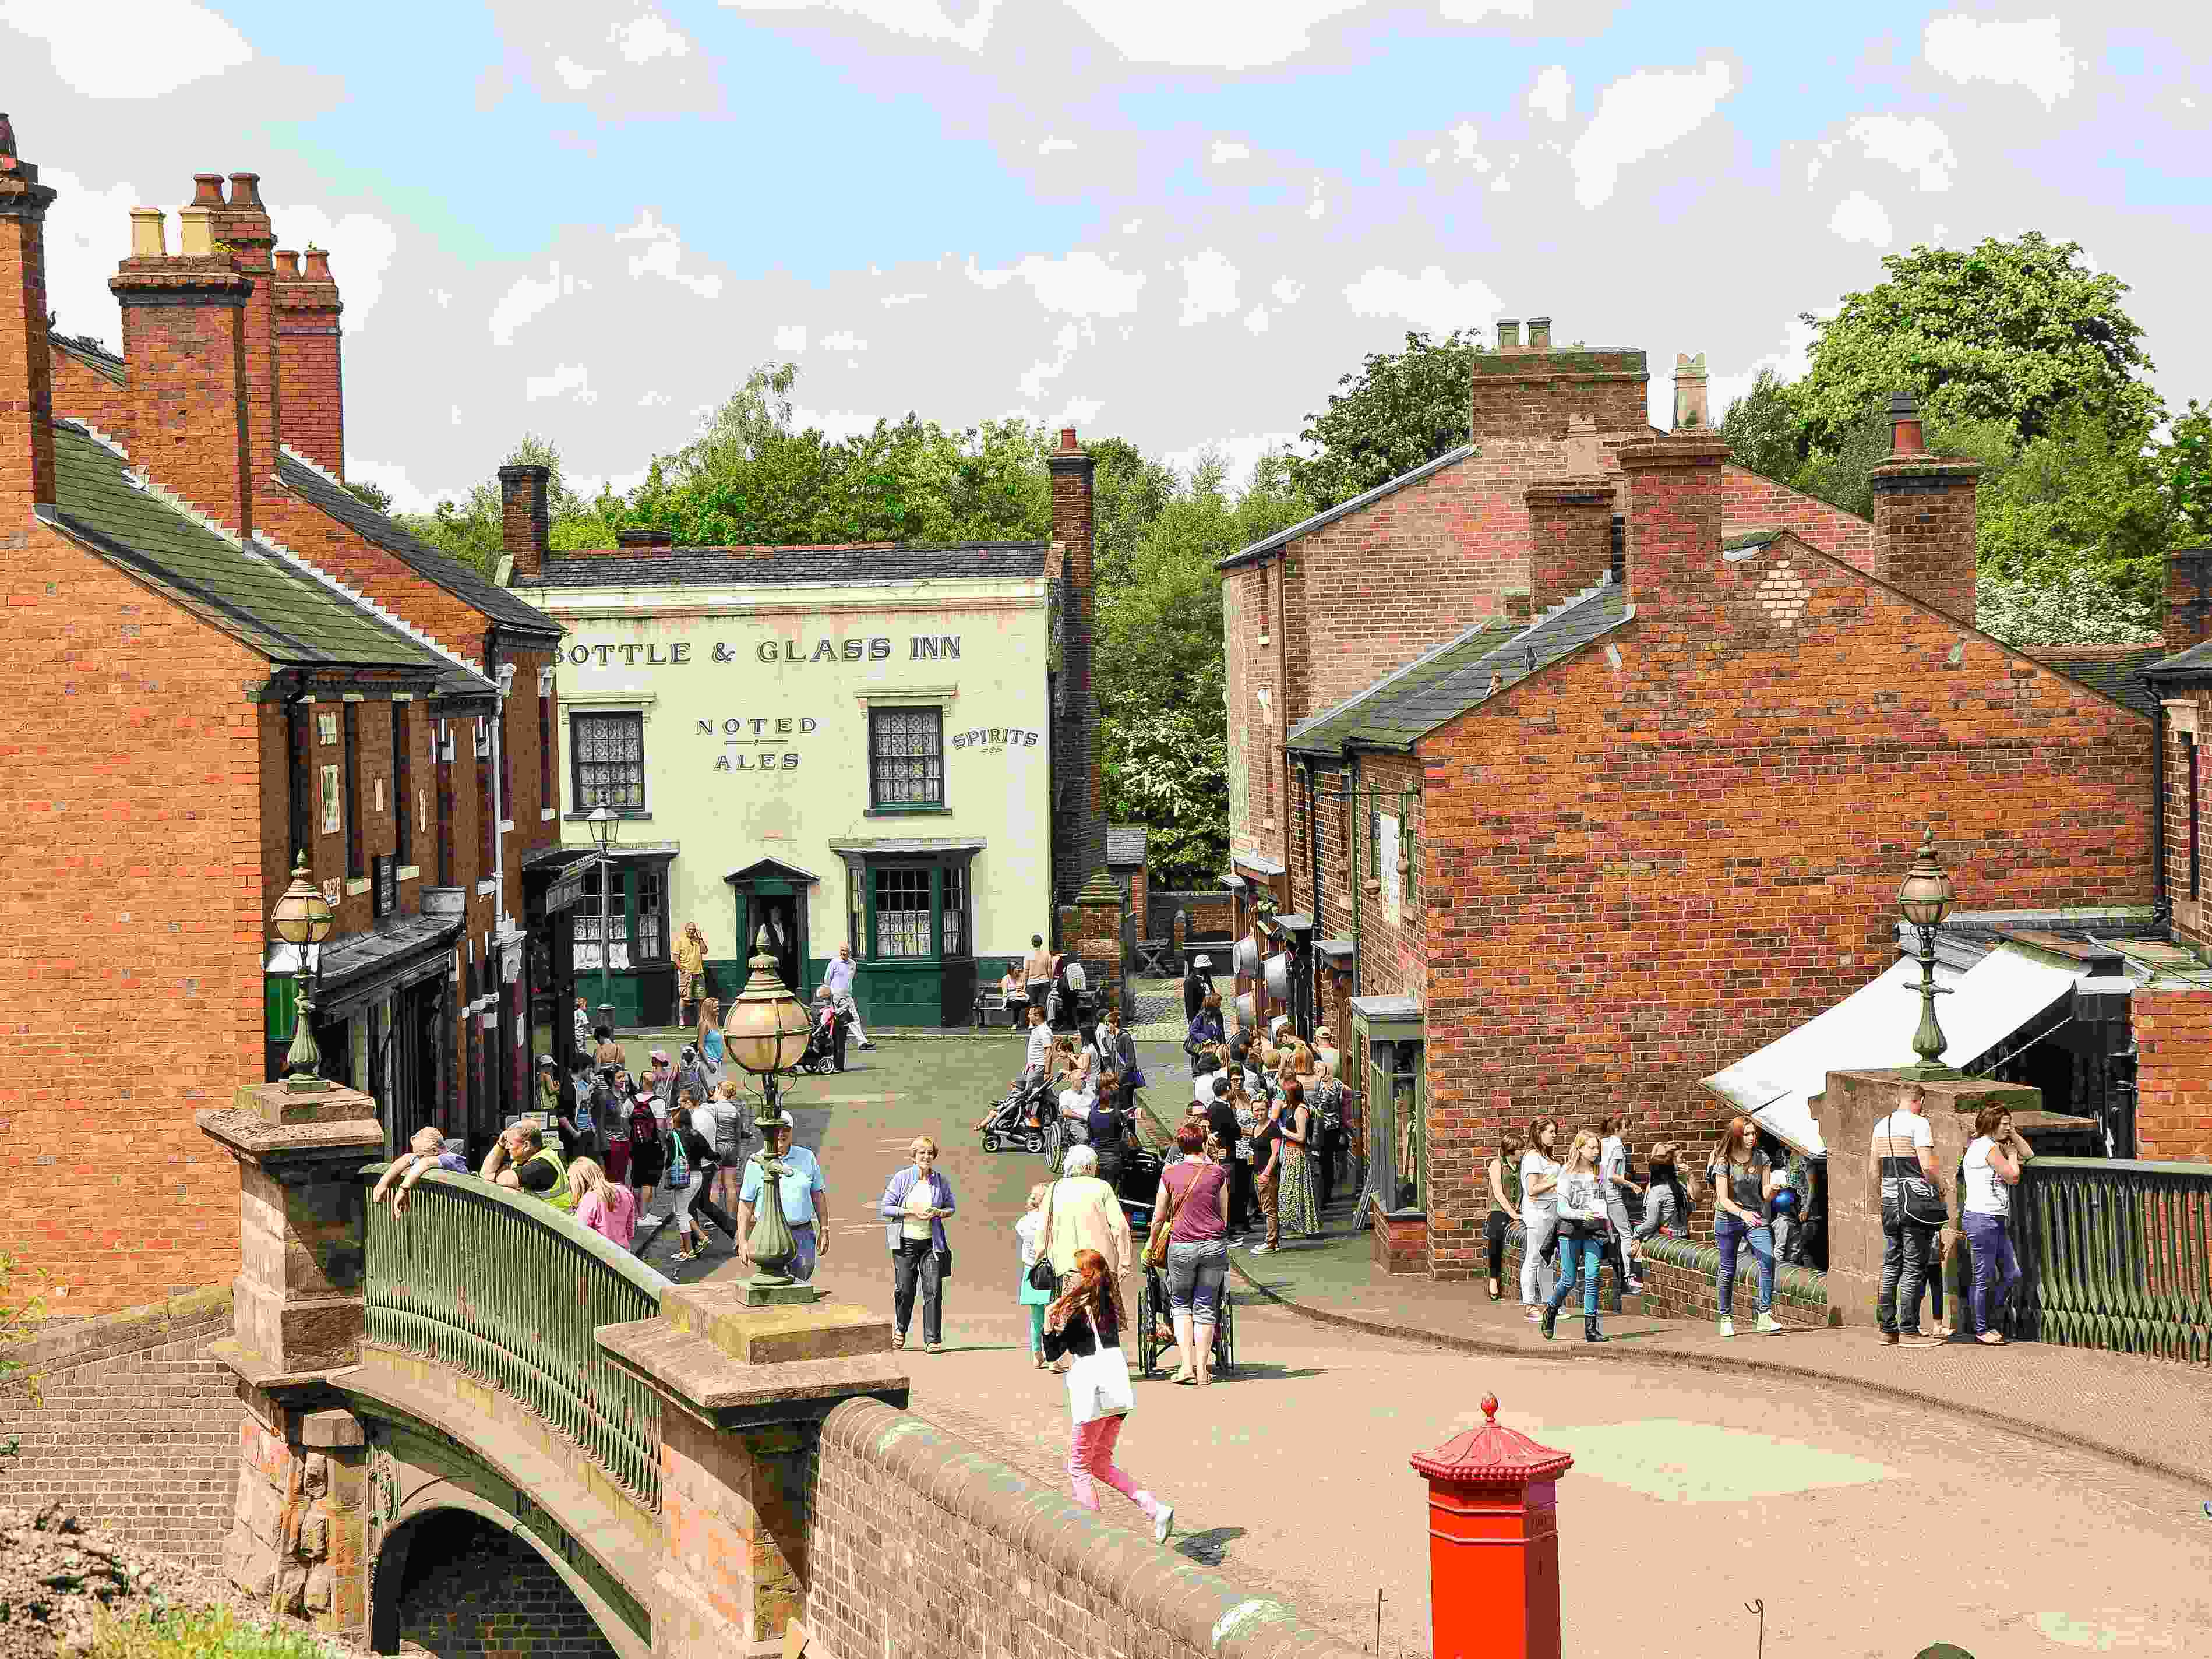 Black Country Living Museum: 12 minute drive from our hotel